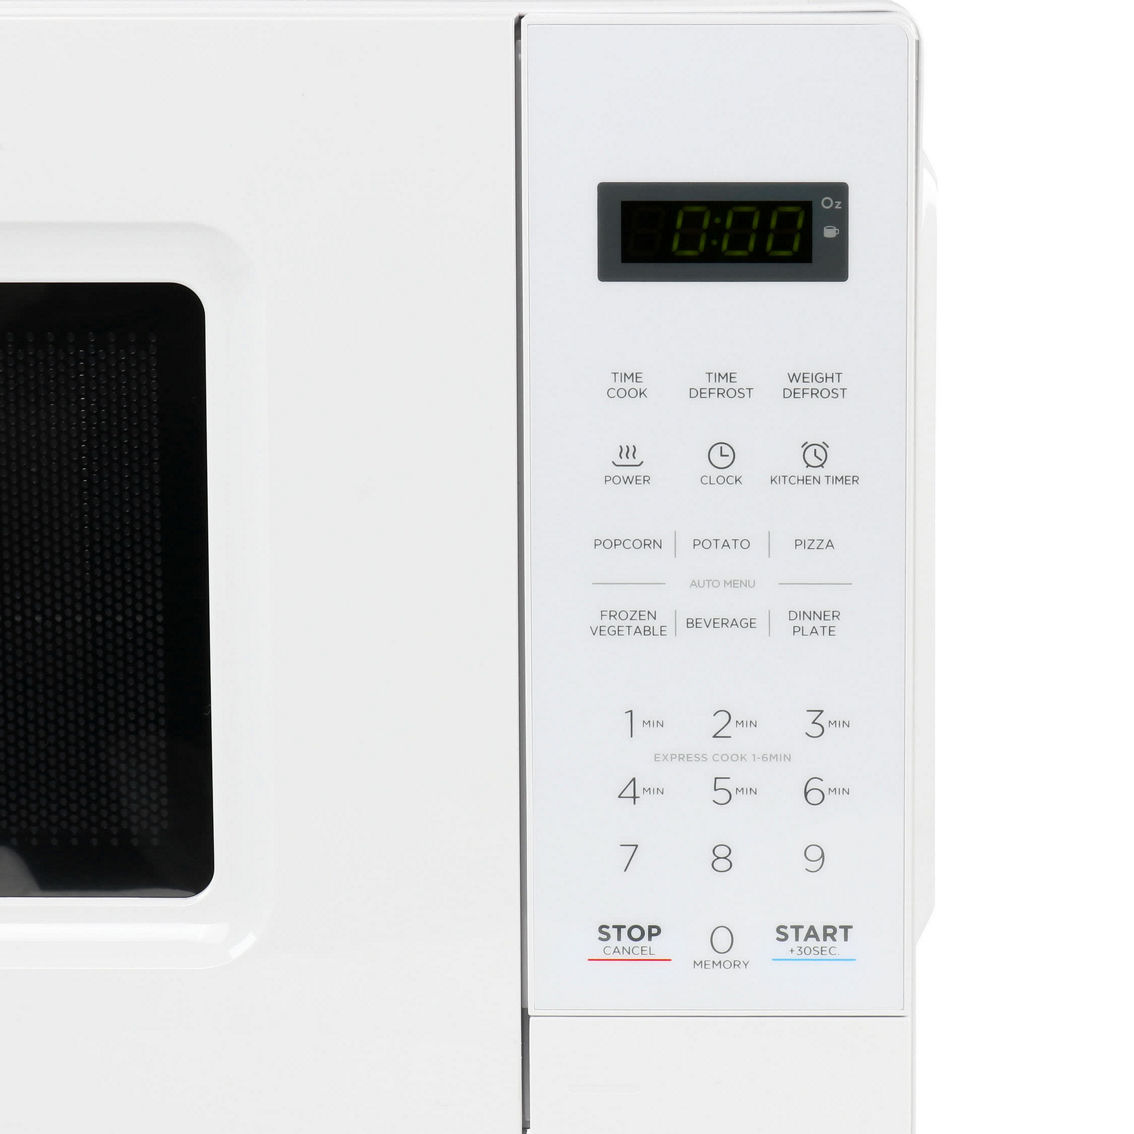 Black and Decker 0.7 Cu Ft 700 Watt LED Digital Microwave Oven in White with Chi - Image 3 of 5